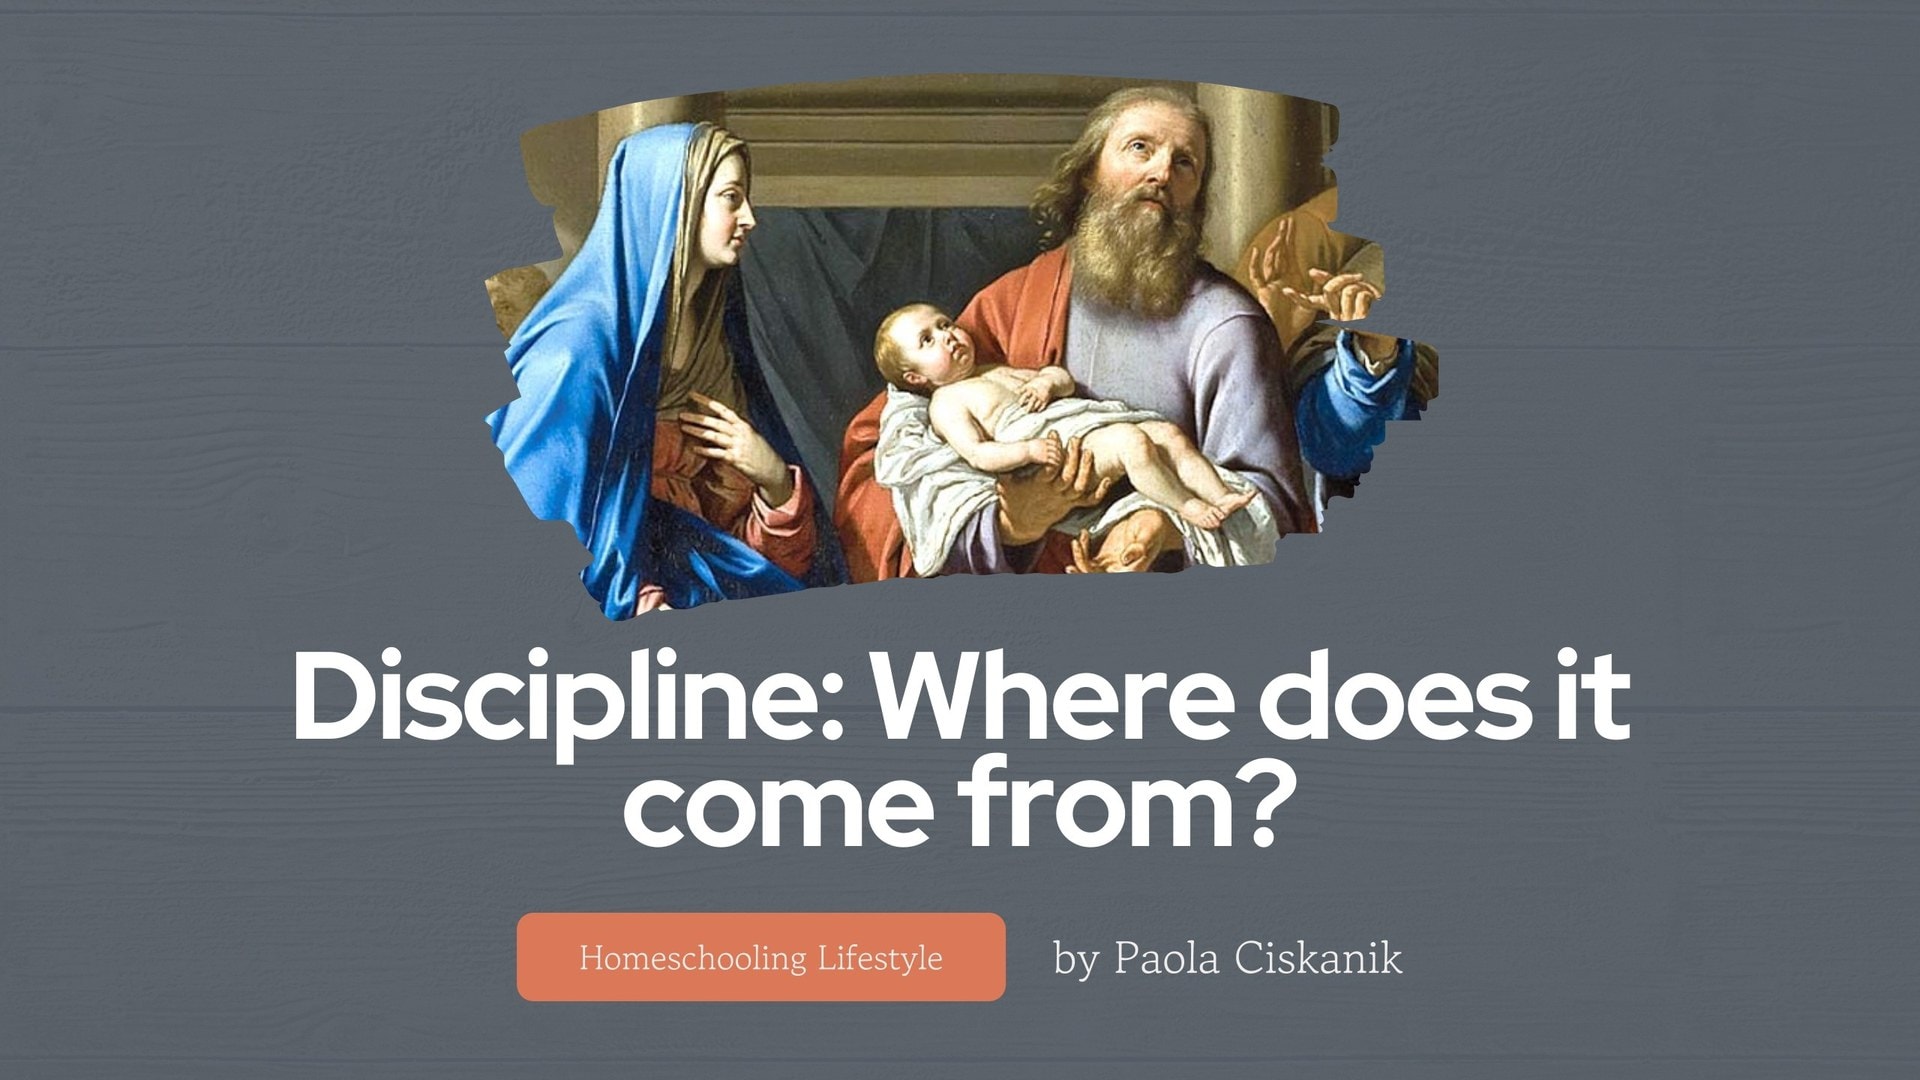 Discipline: Where does it come from?